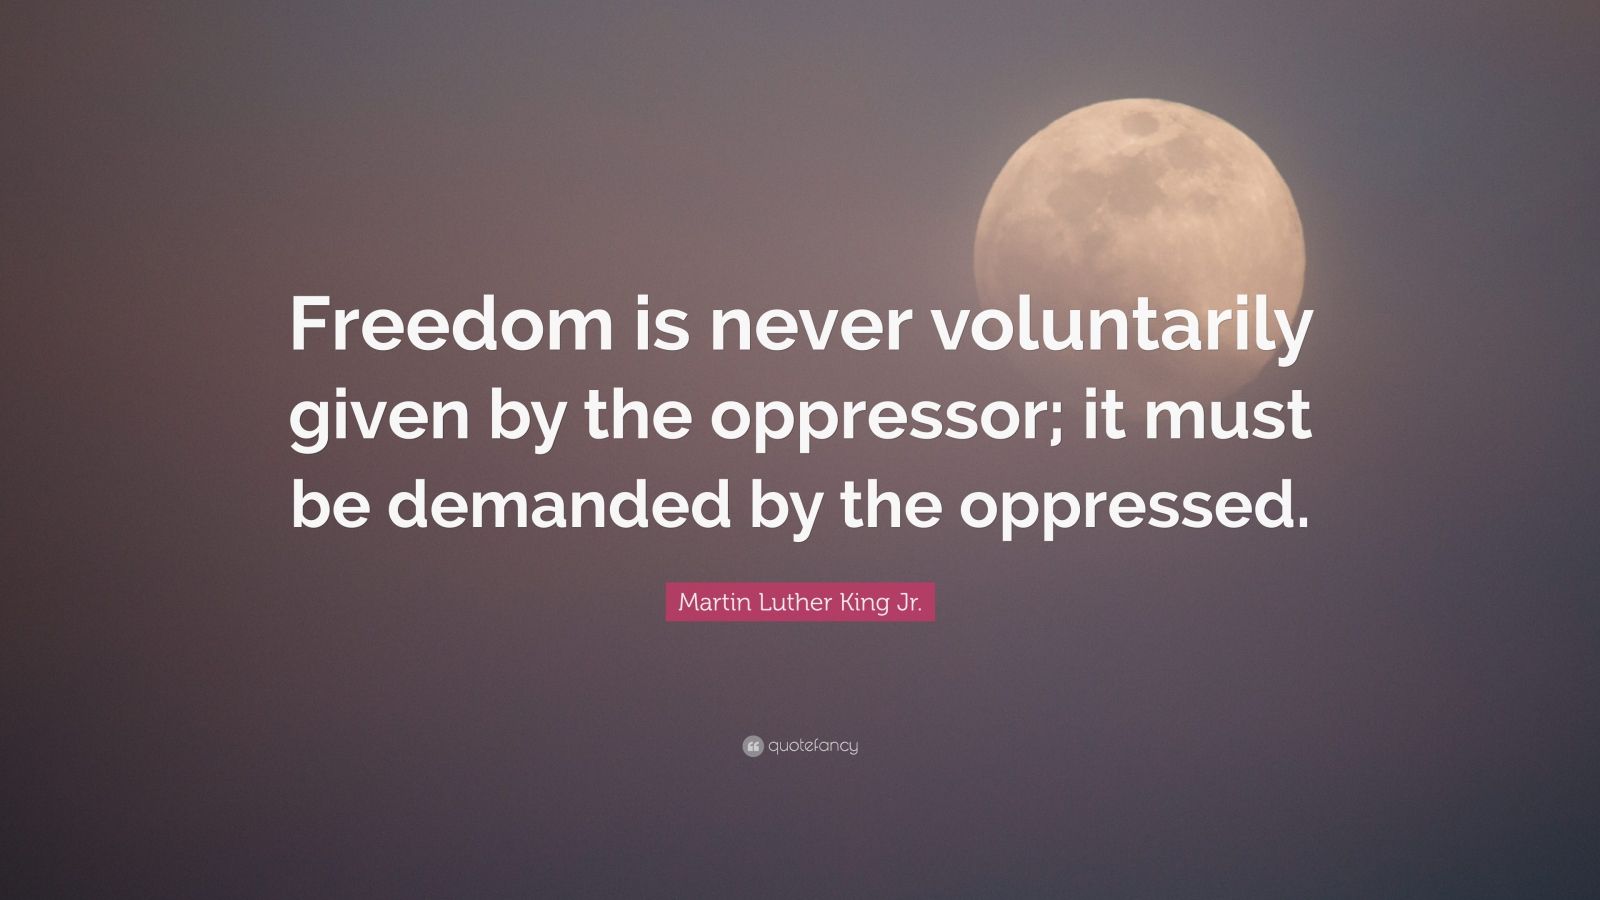 Martin Luther King Jr. Quote “Freedom is never